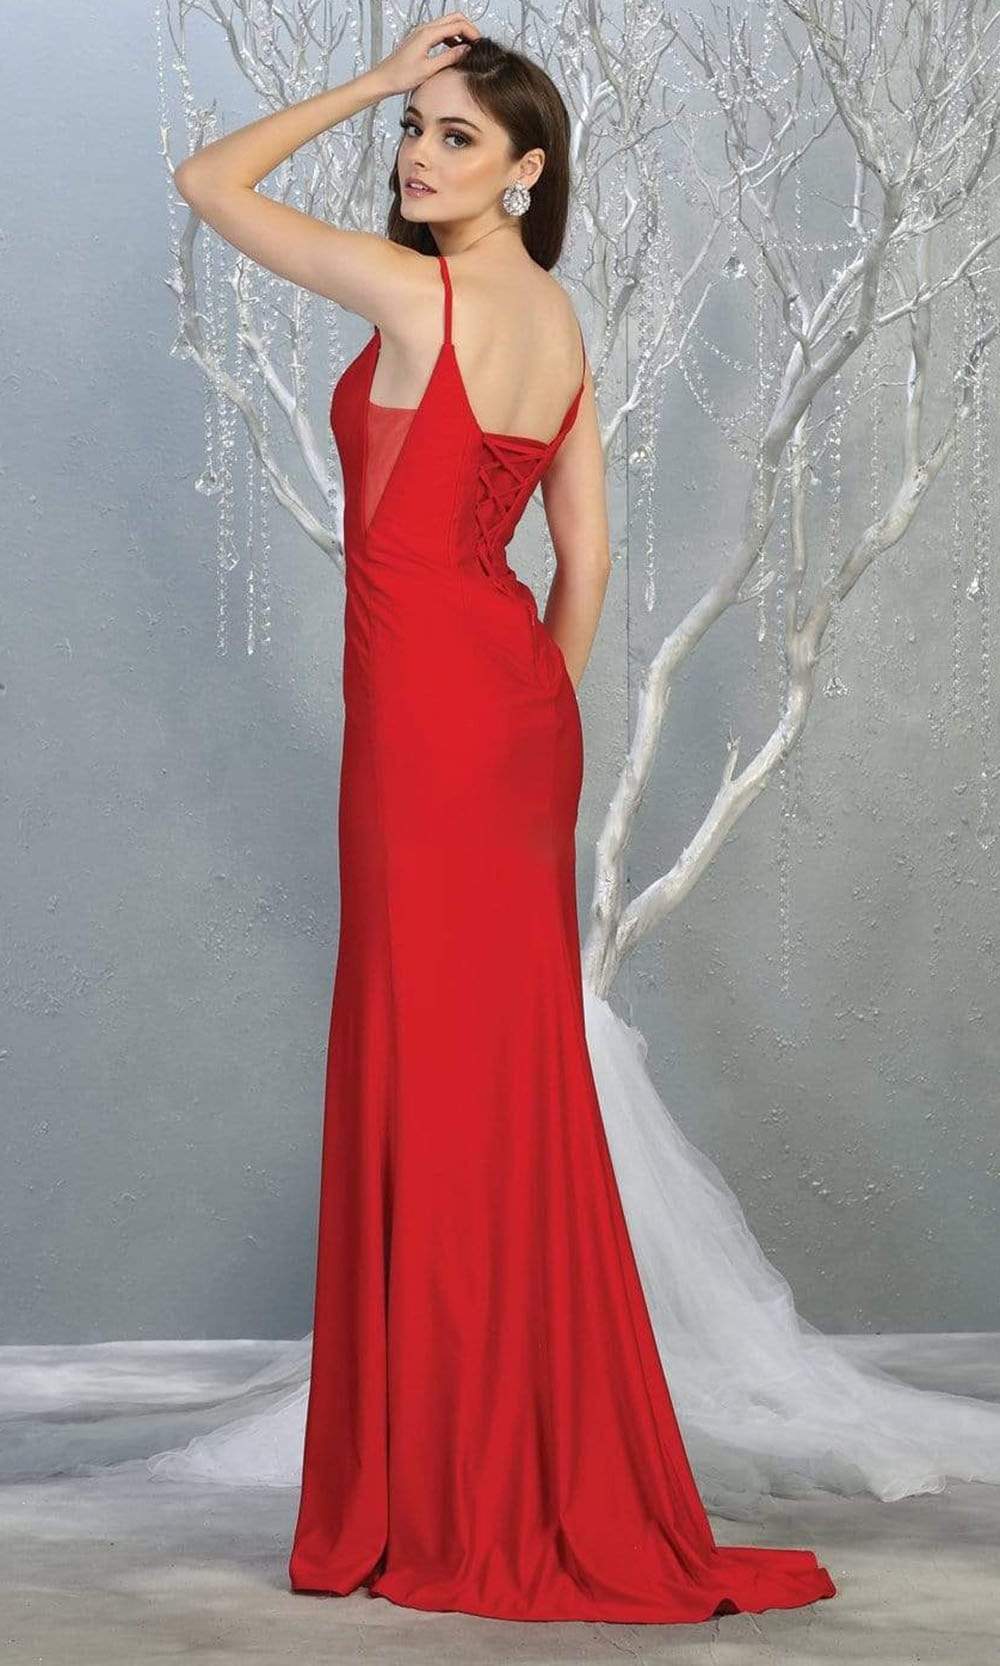 May Queen - MQ1819 Plunging V-neck Sheath Dress With Train Prom Dresses In Red